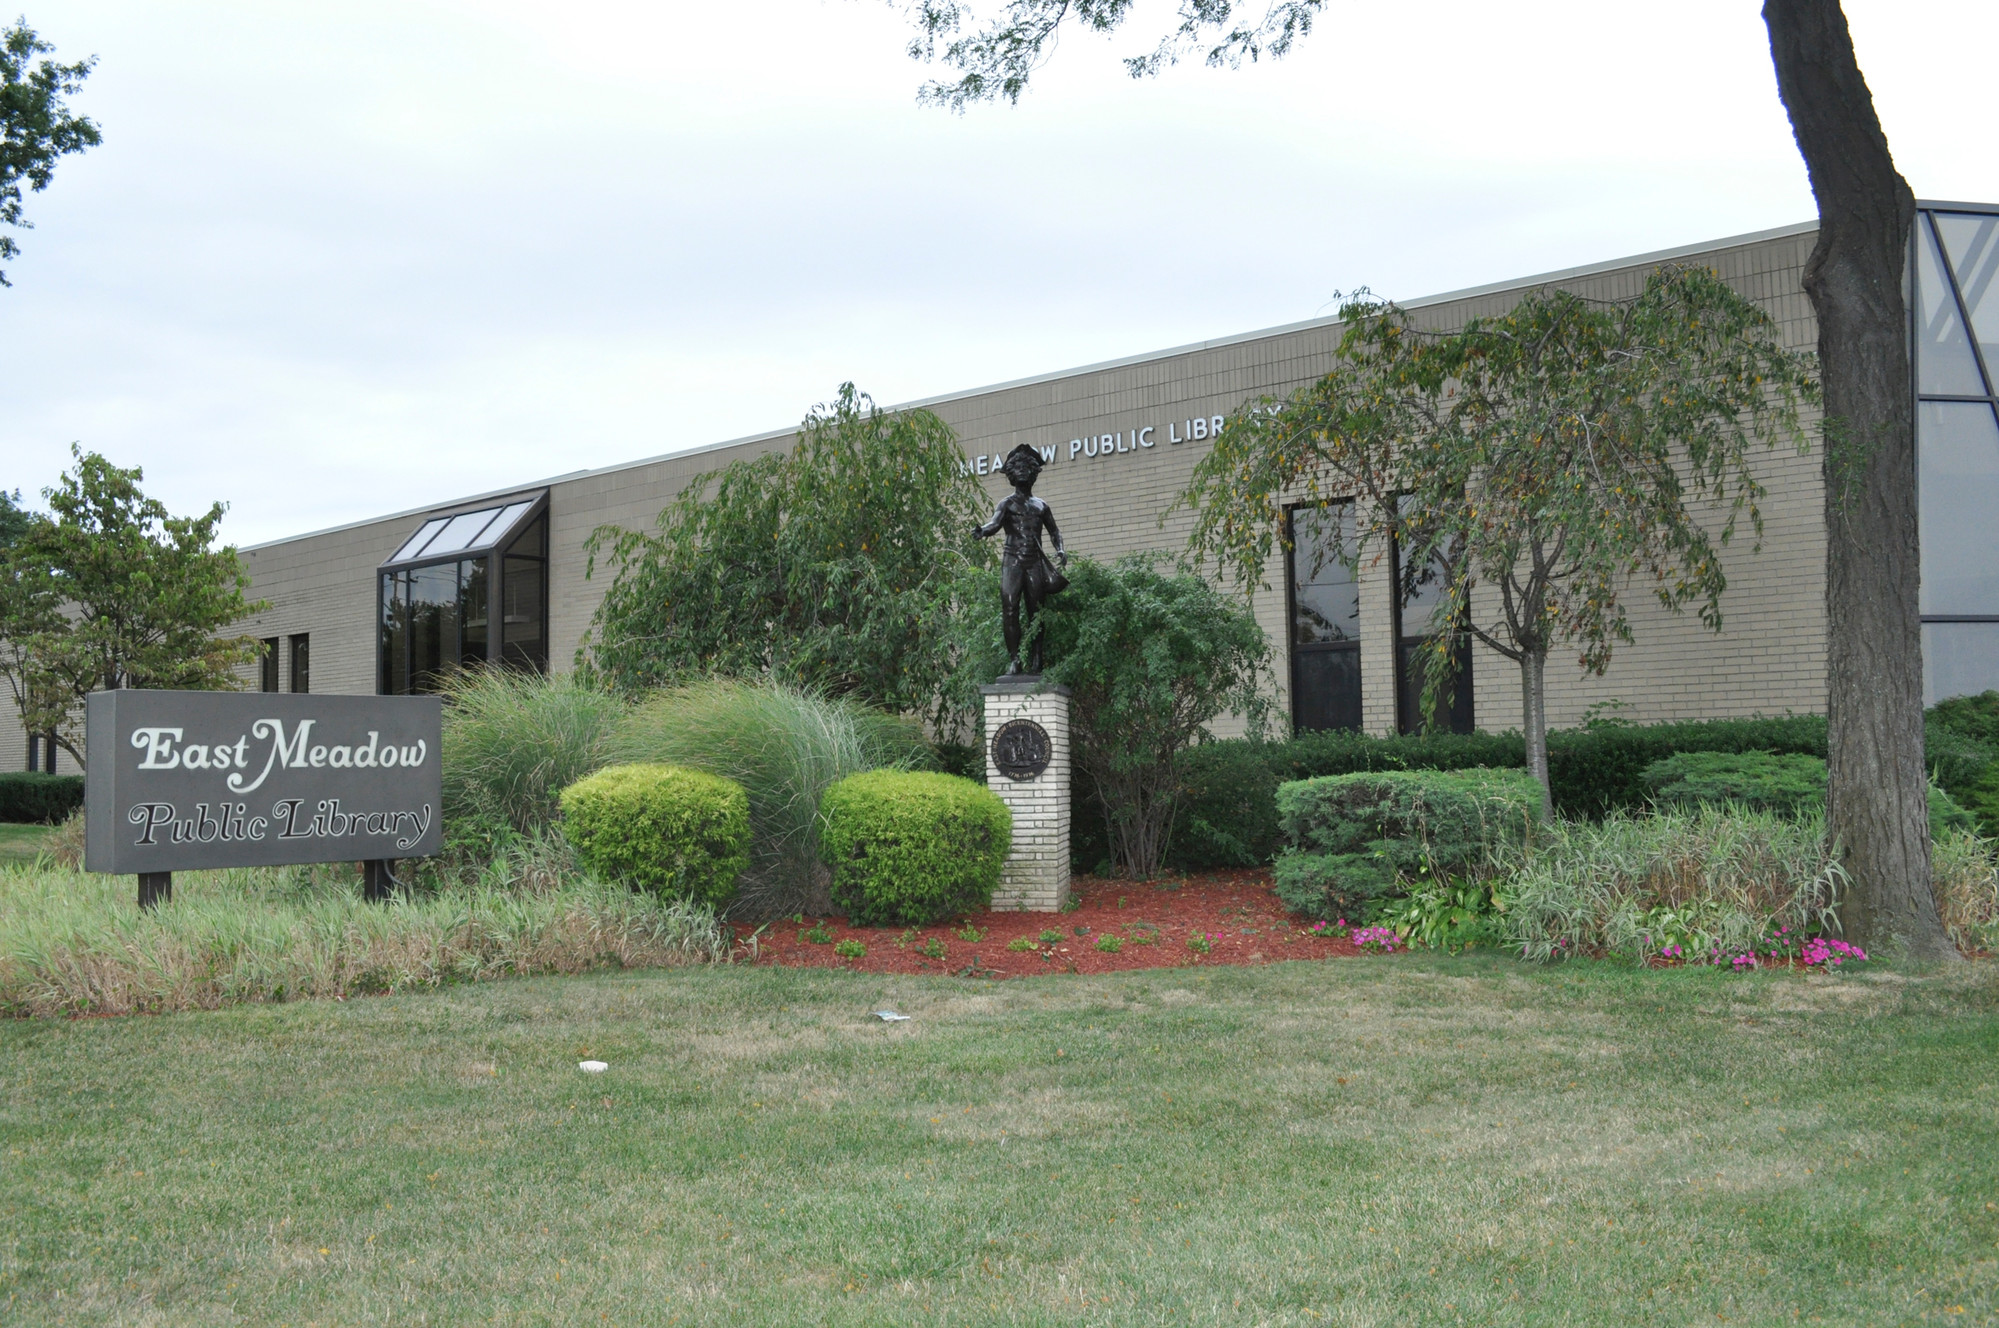 The East Meadow Public Library is at the corner of East meadow Avenue and Front Street.